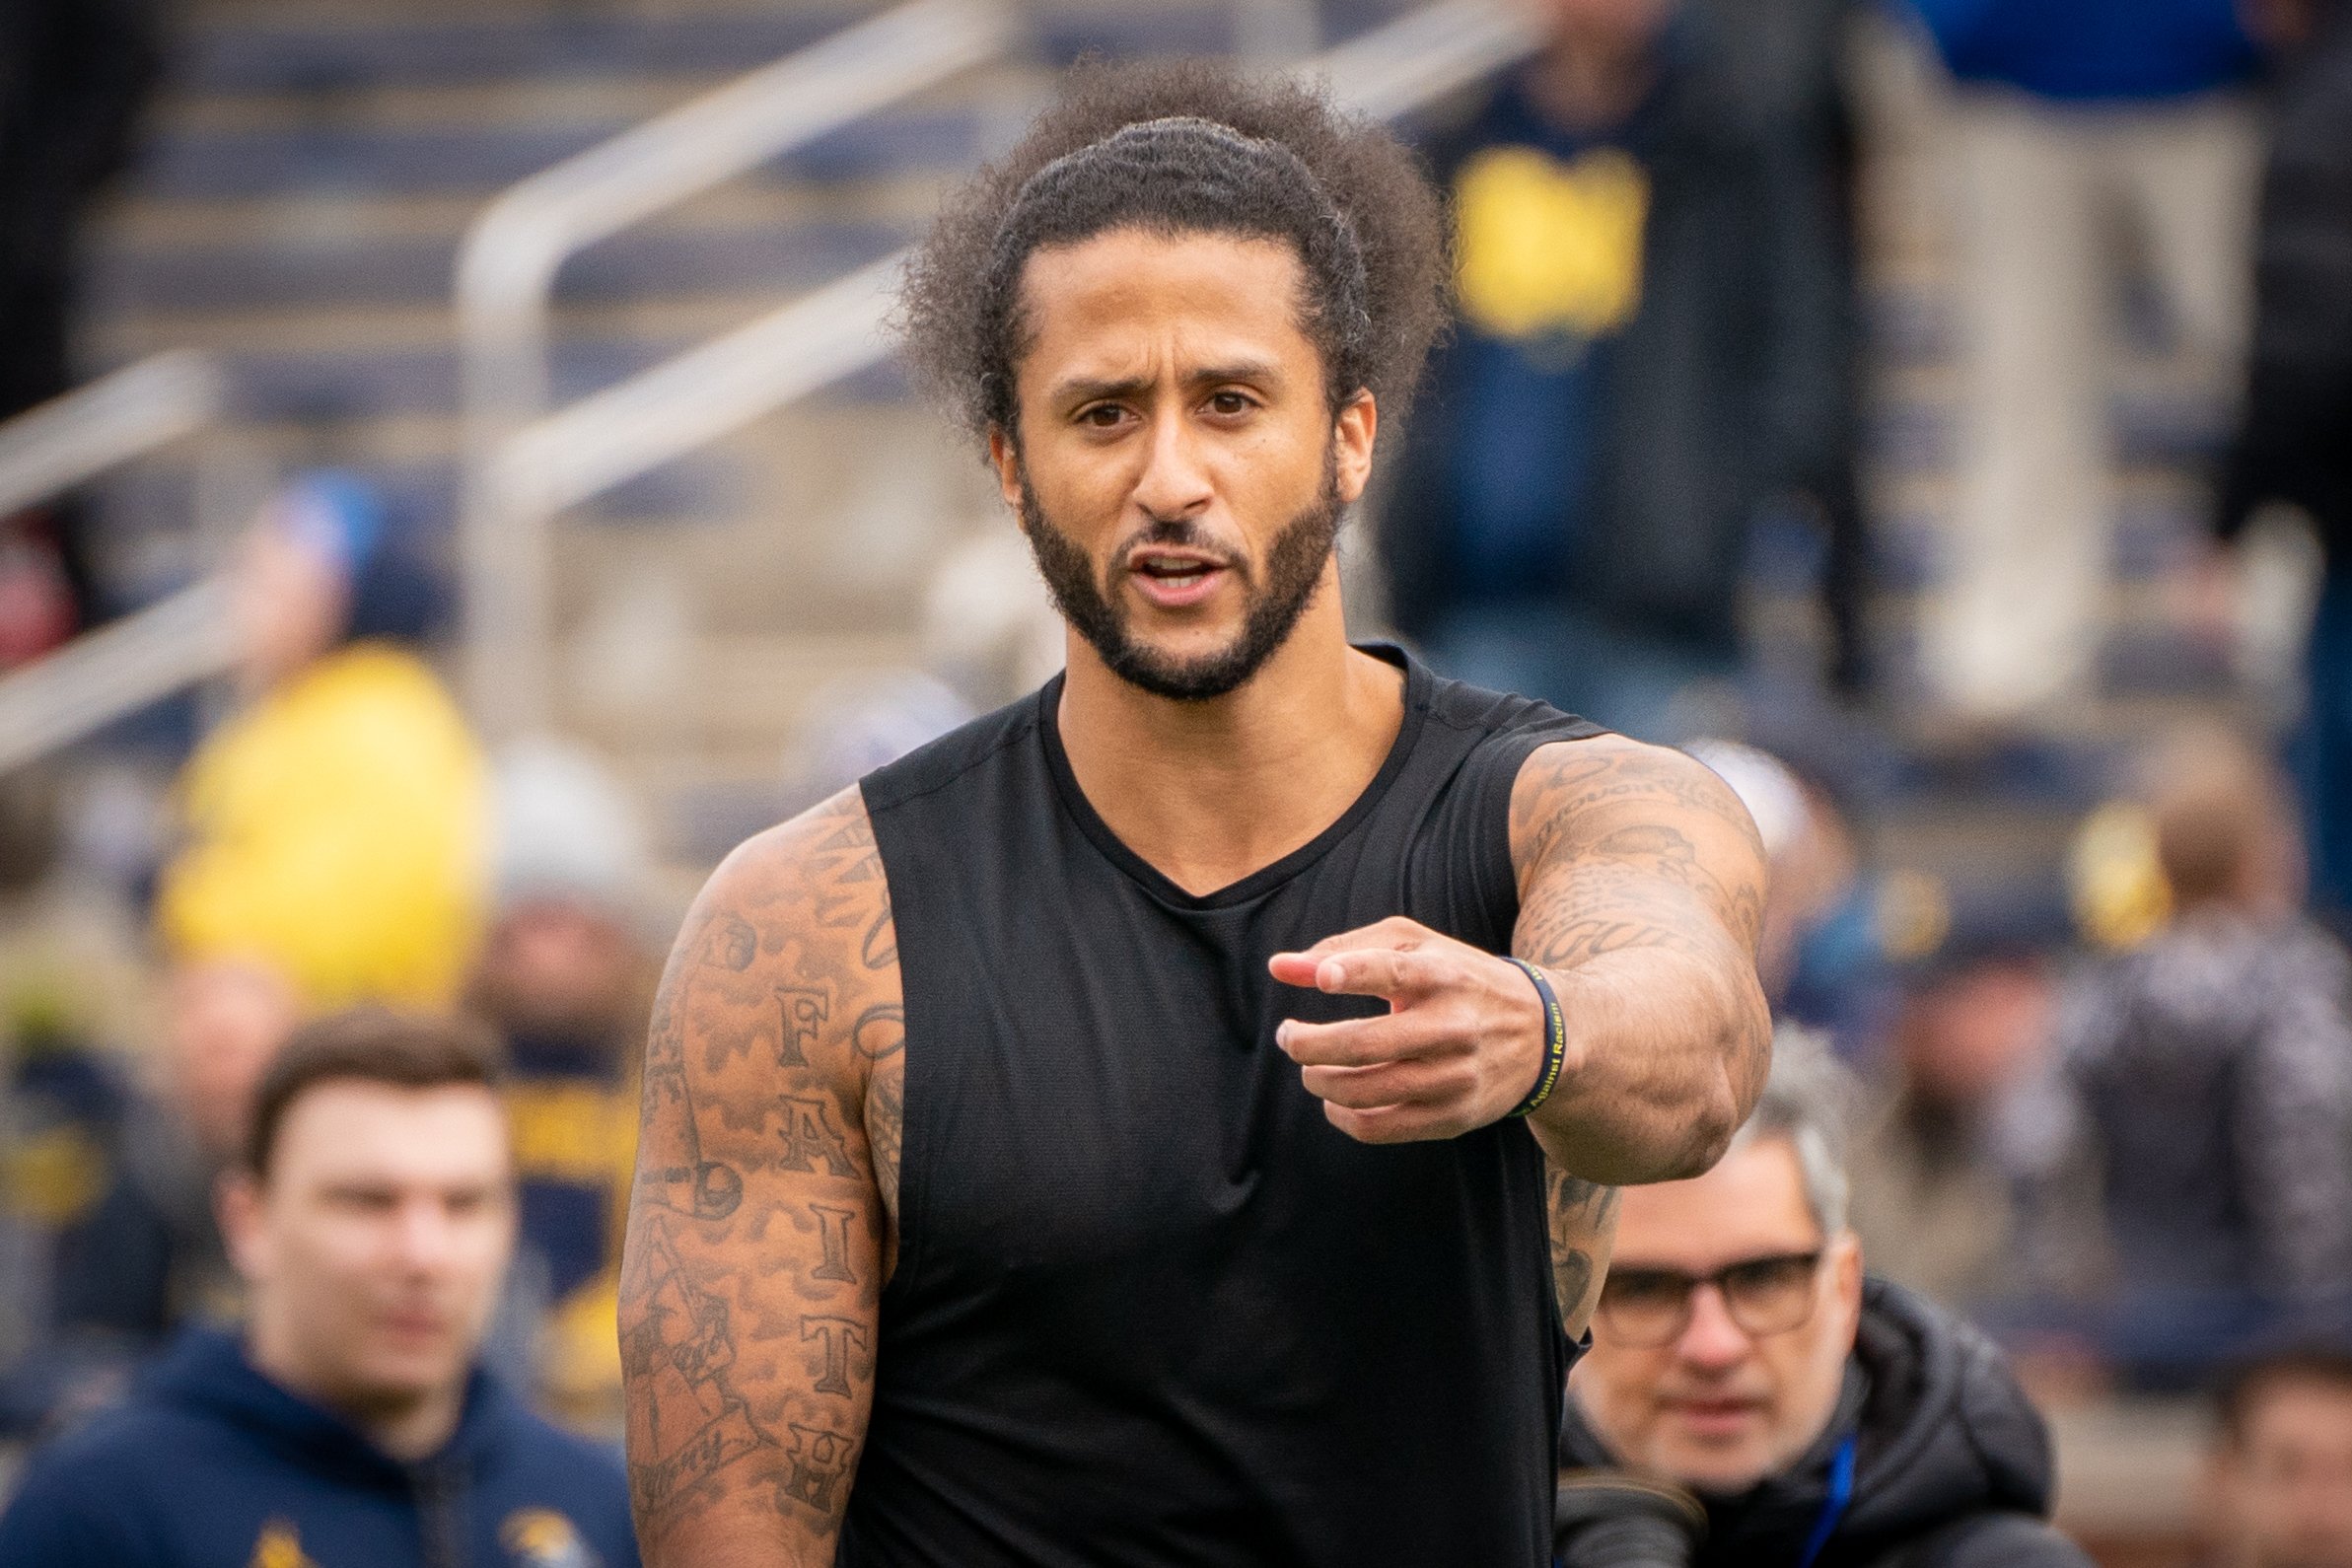 Colin Kaepernick photographed as he participates in a throwing exhibition during half time of the Michigan spring football game in Ann Arbor | Source: Getty Images